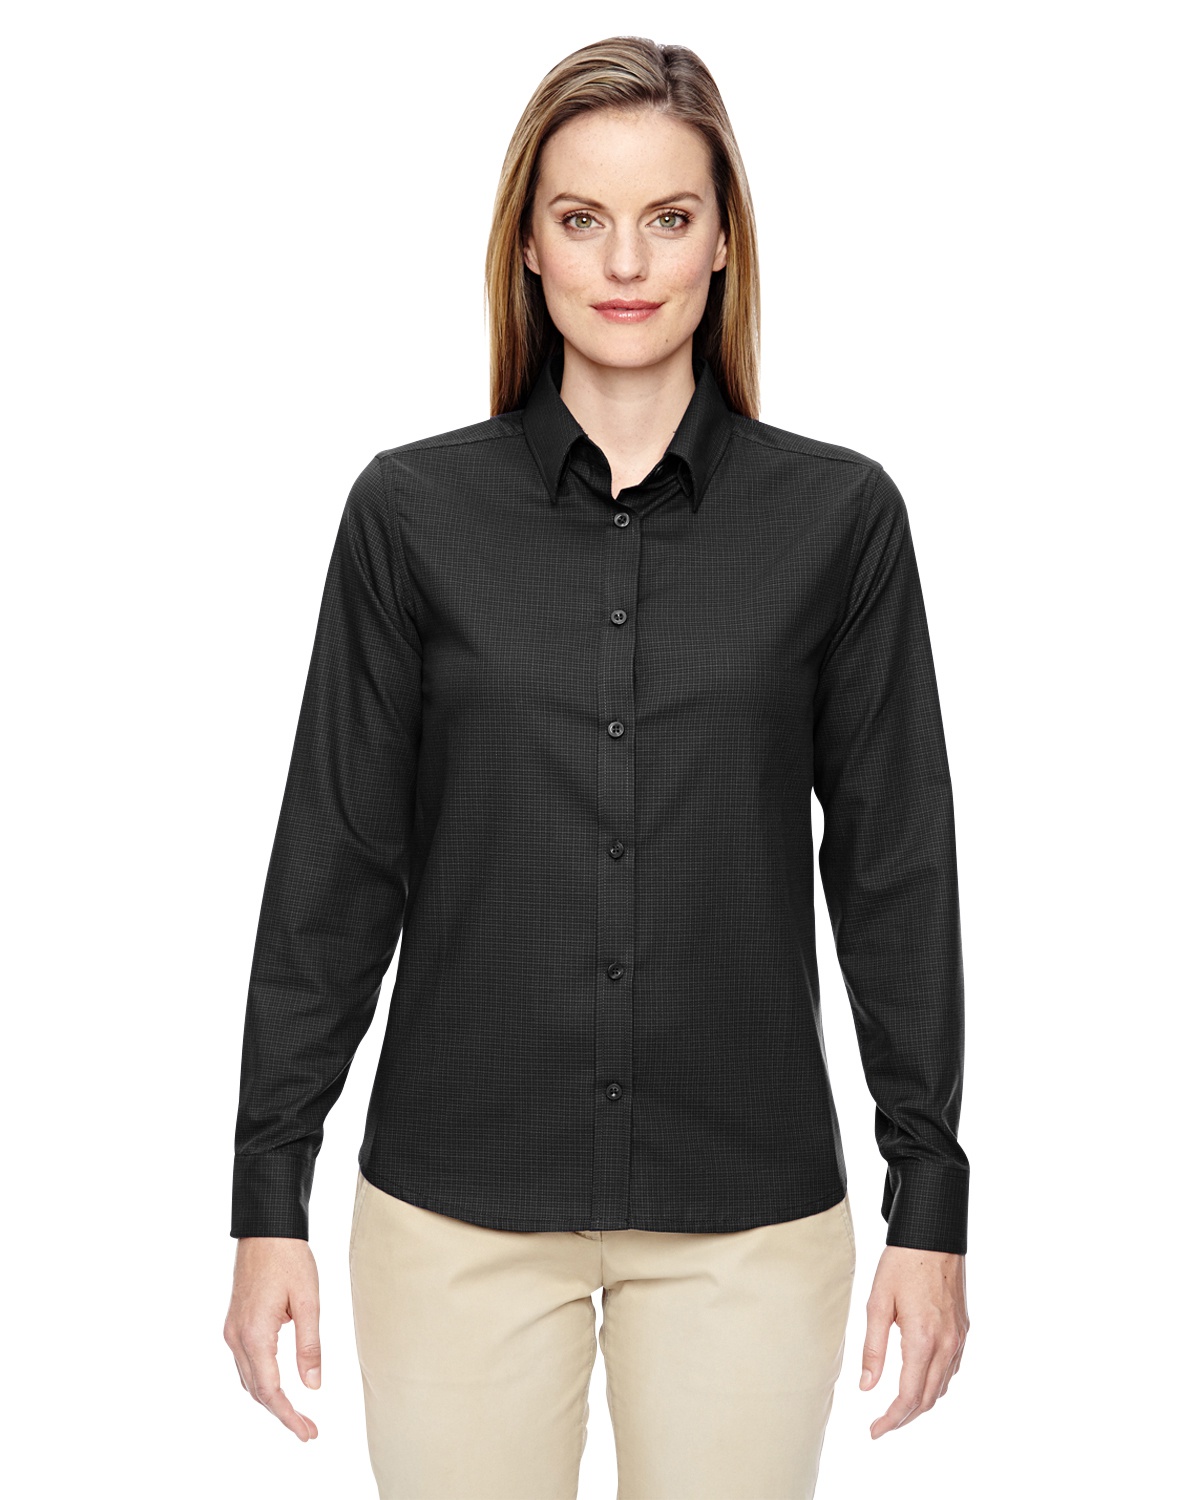 'Ash City - North End 77043 Ladies Paramount Wrinkle-Resistant Cotton Blend Twill Checkered Shirt'